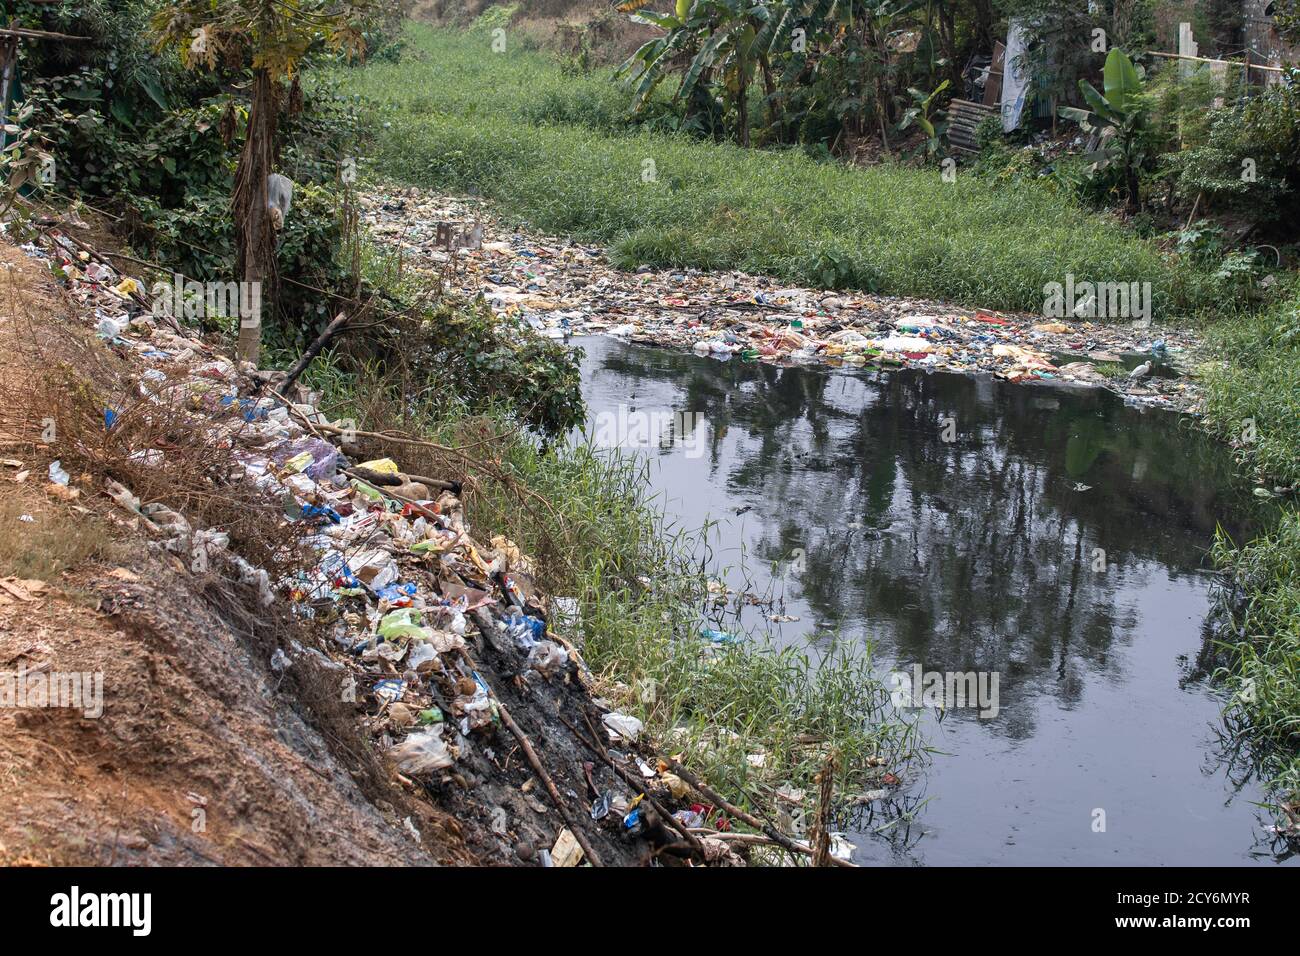 Heaps of plastic waste thrown in an overgrown river, bad for the environment in Bhubaneswar, India Stock Photo